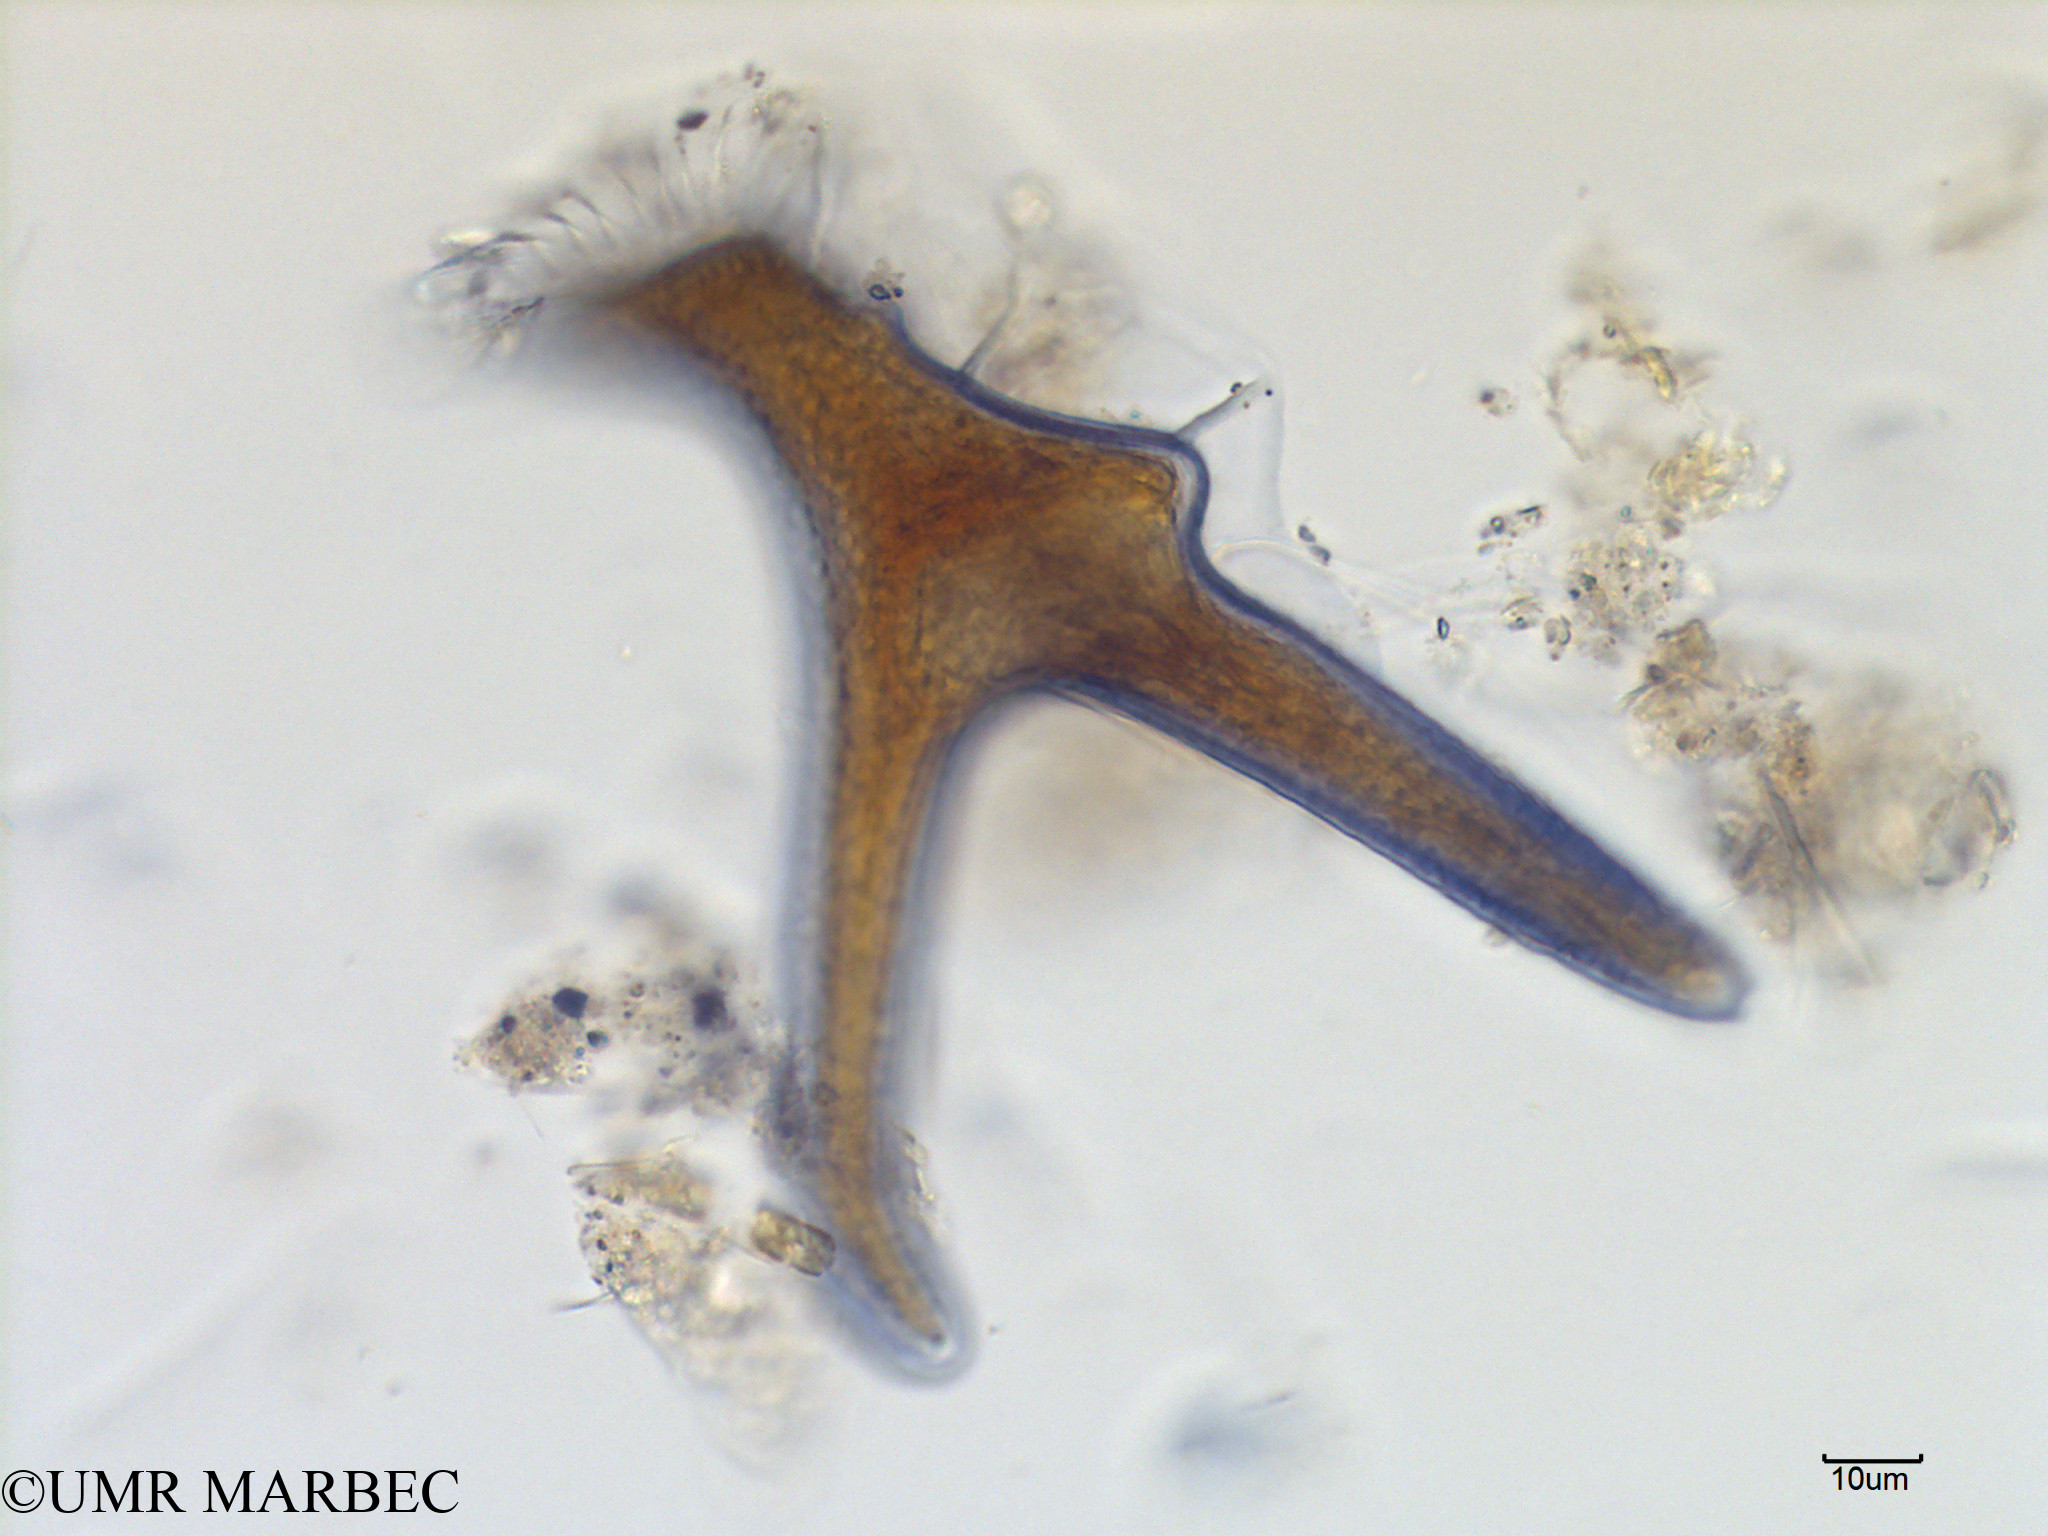 phyto/Scattered_Islands/mayotte_lagoon/SIREME May 2016/Dinophysis miles (MAY8_dino a identifier-20).tif(copy).jpg